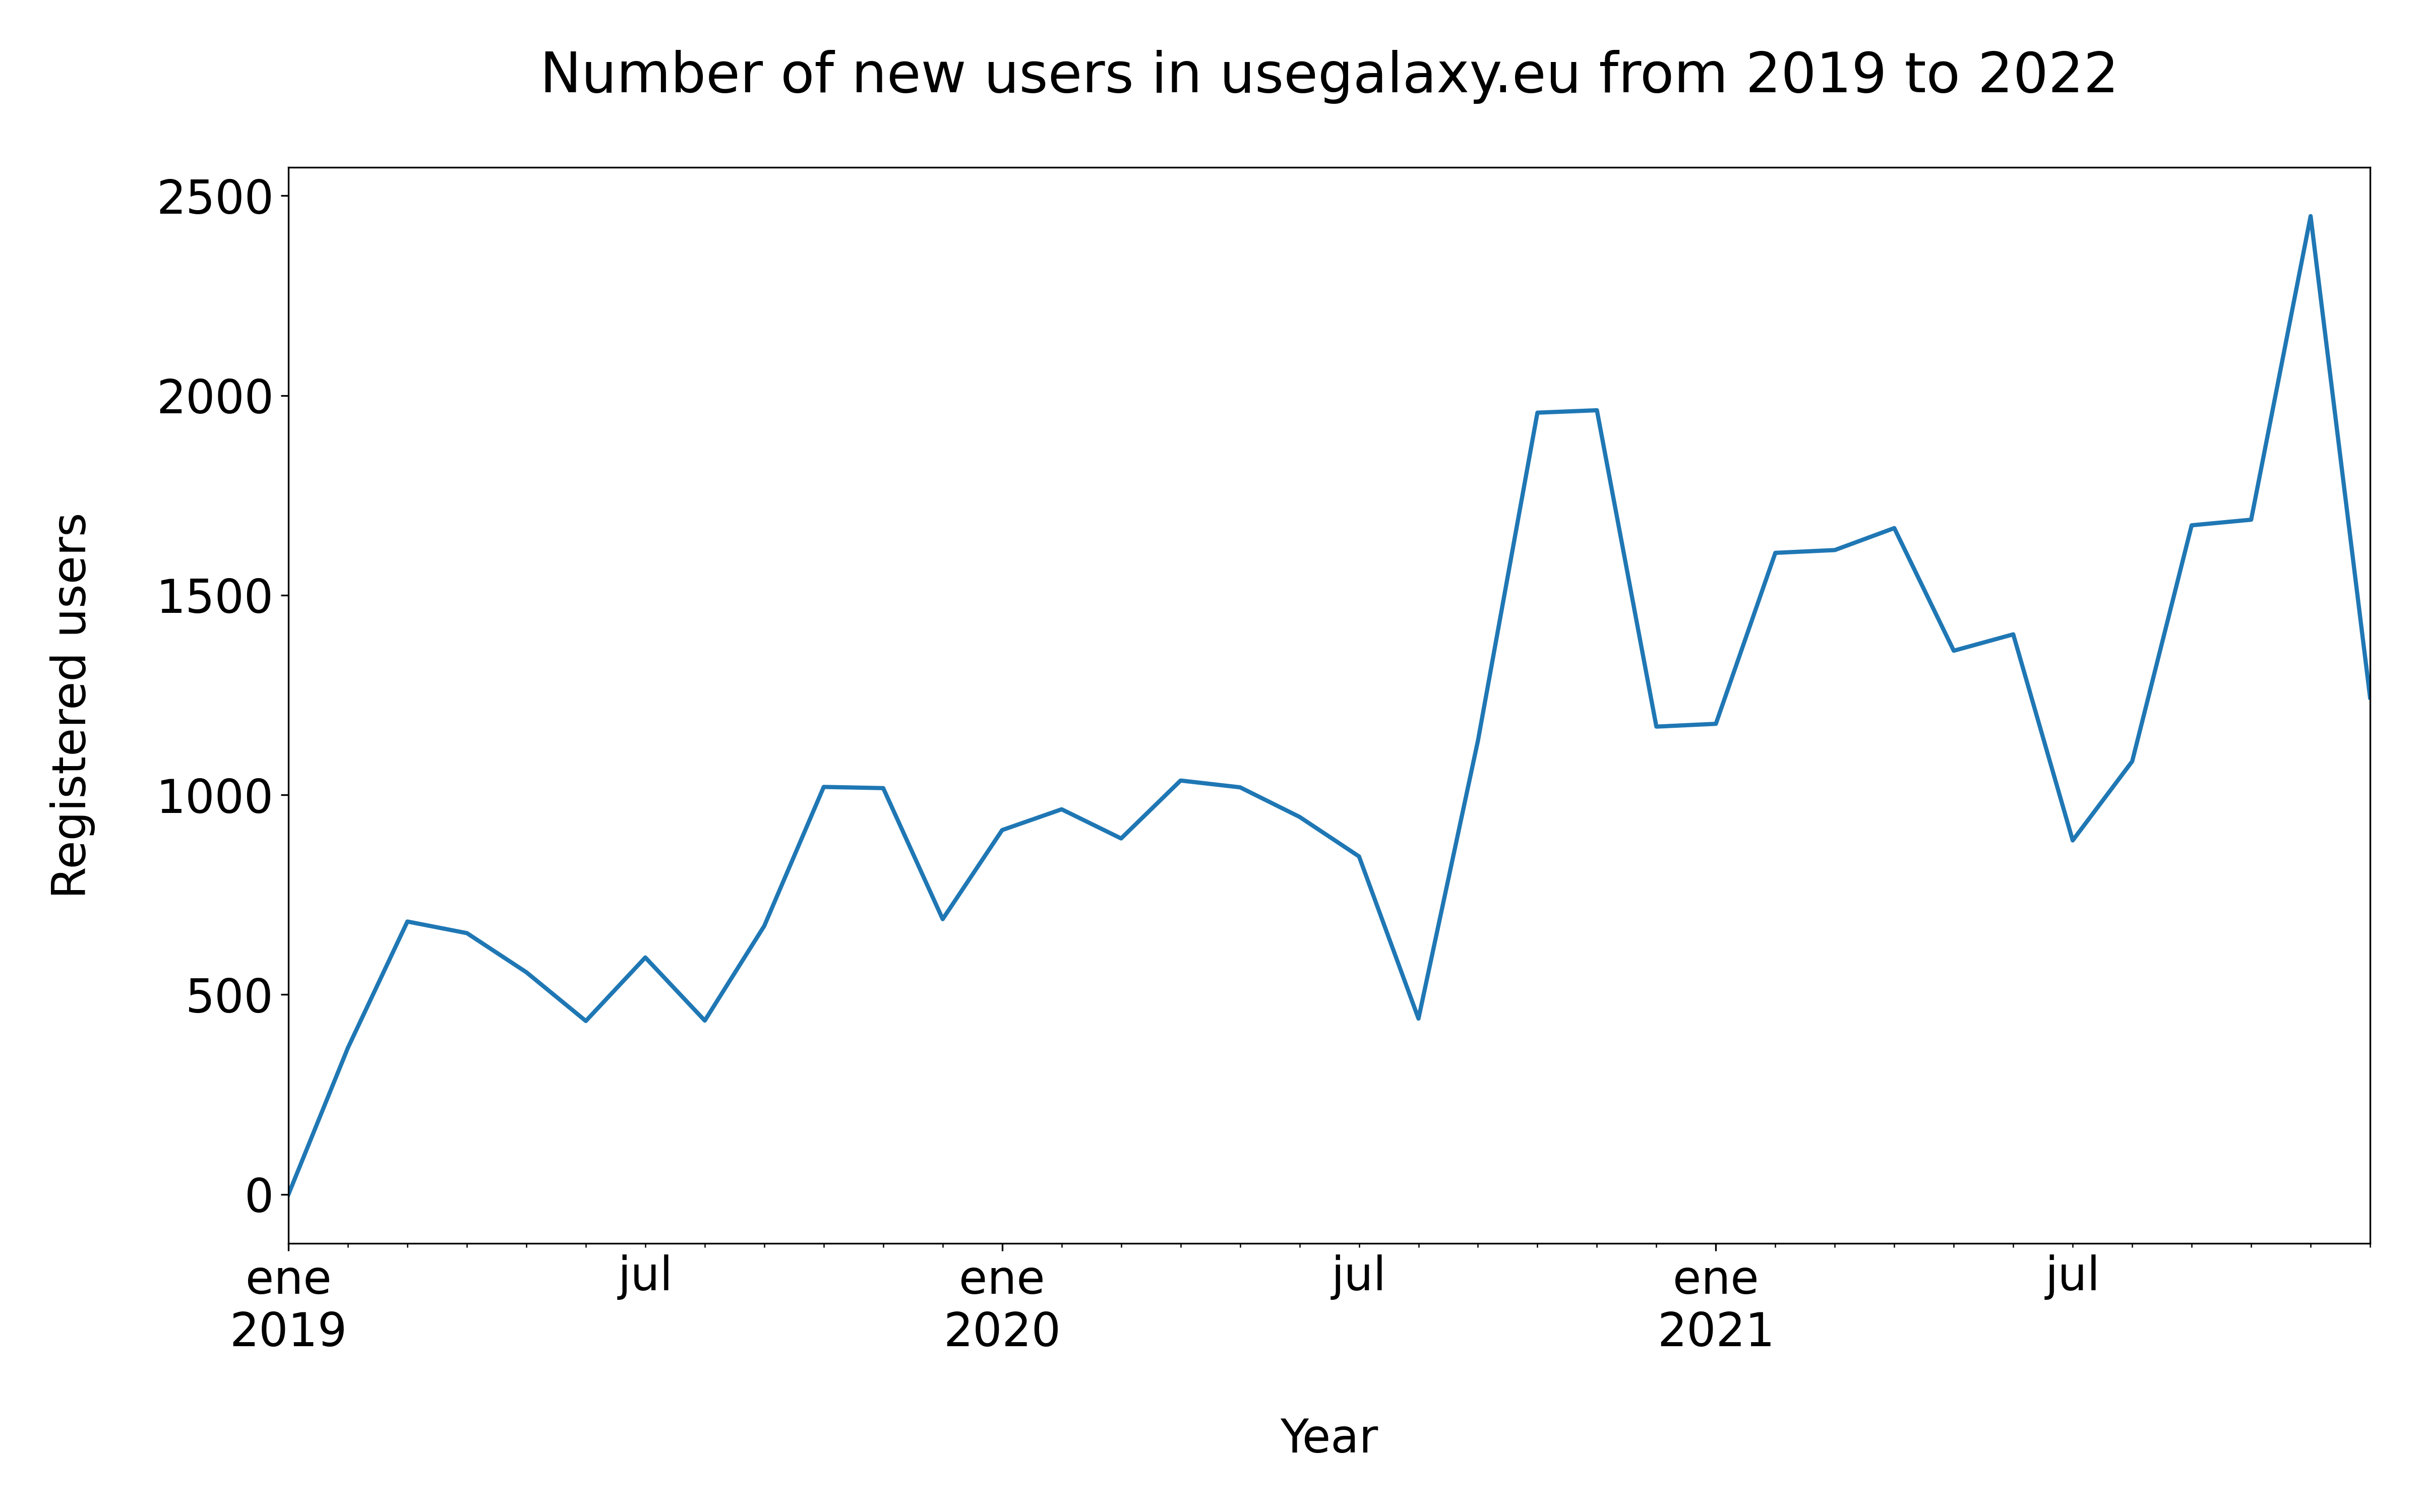 Number of new users montly